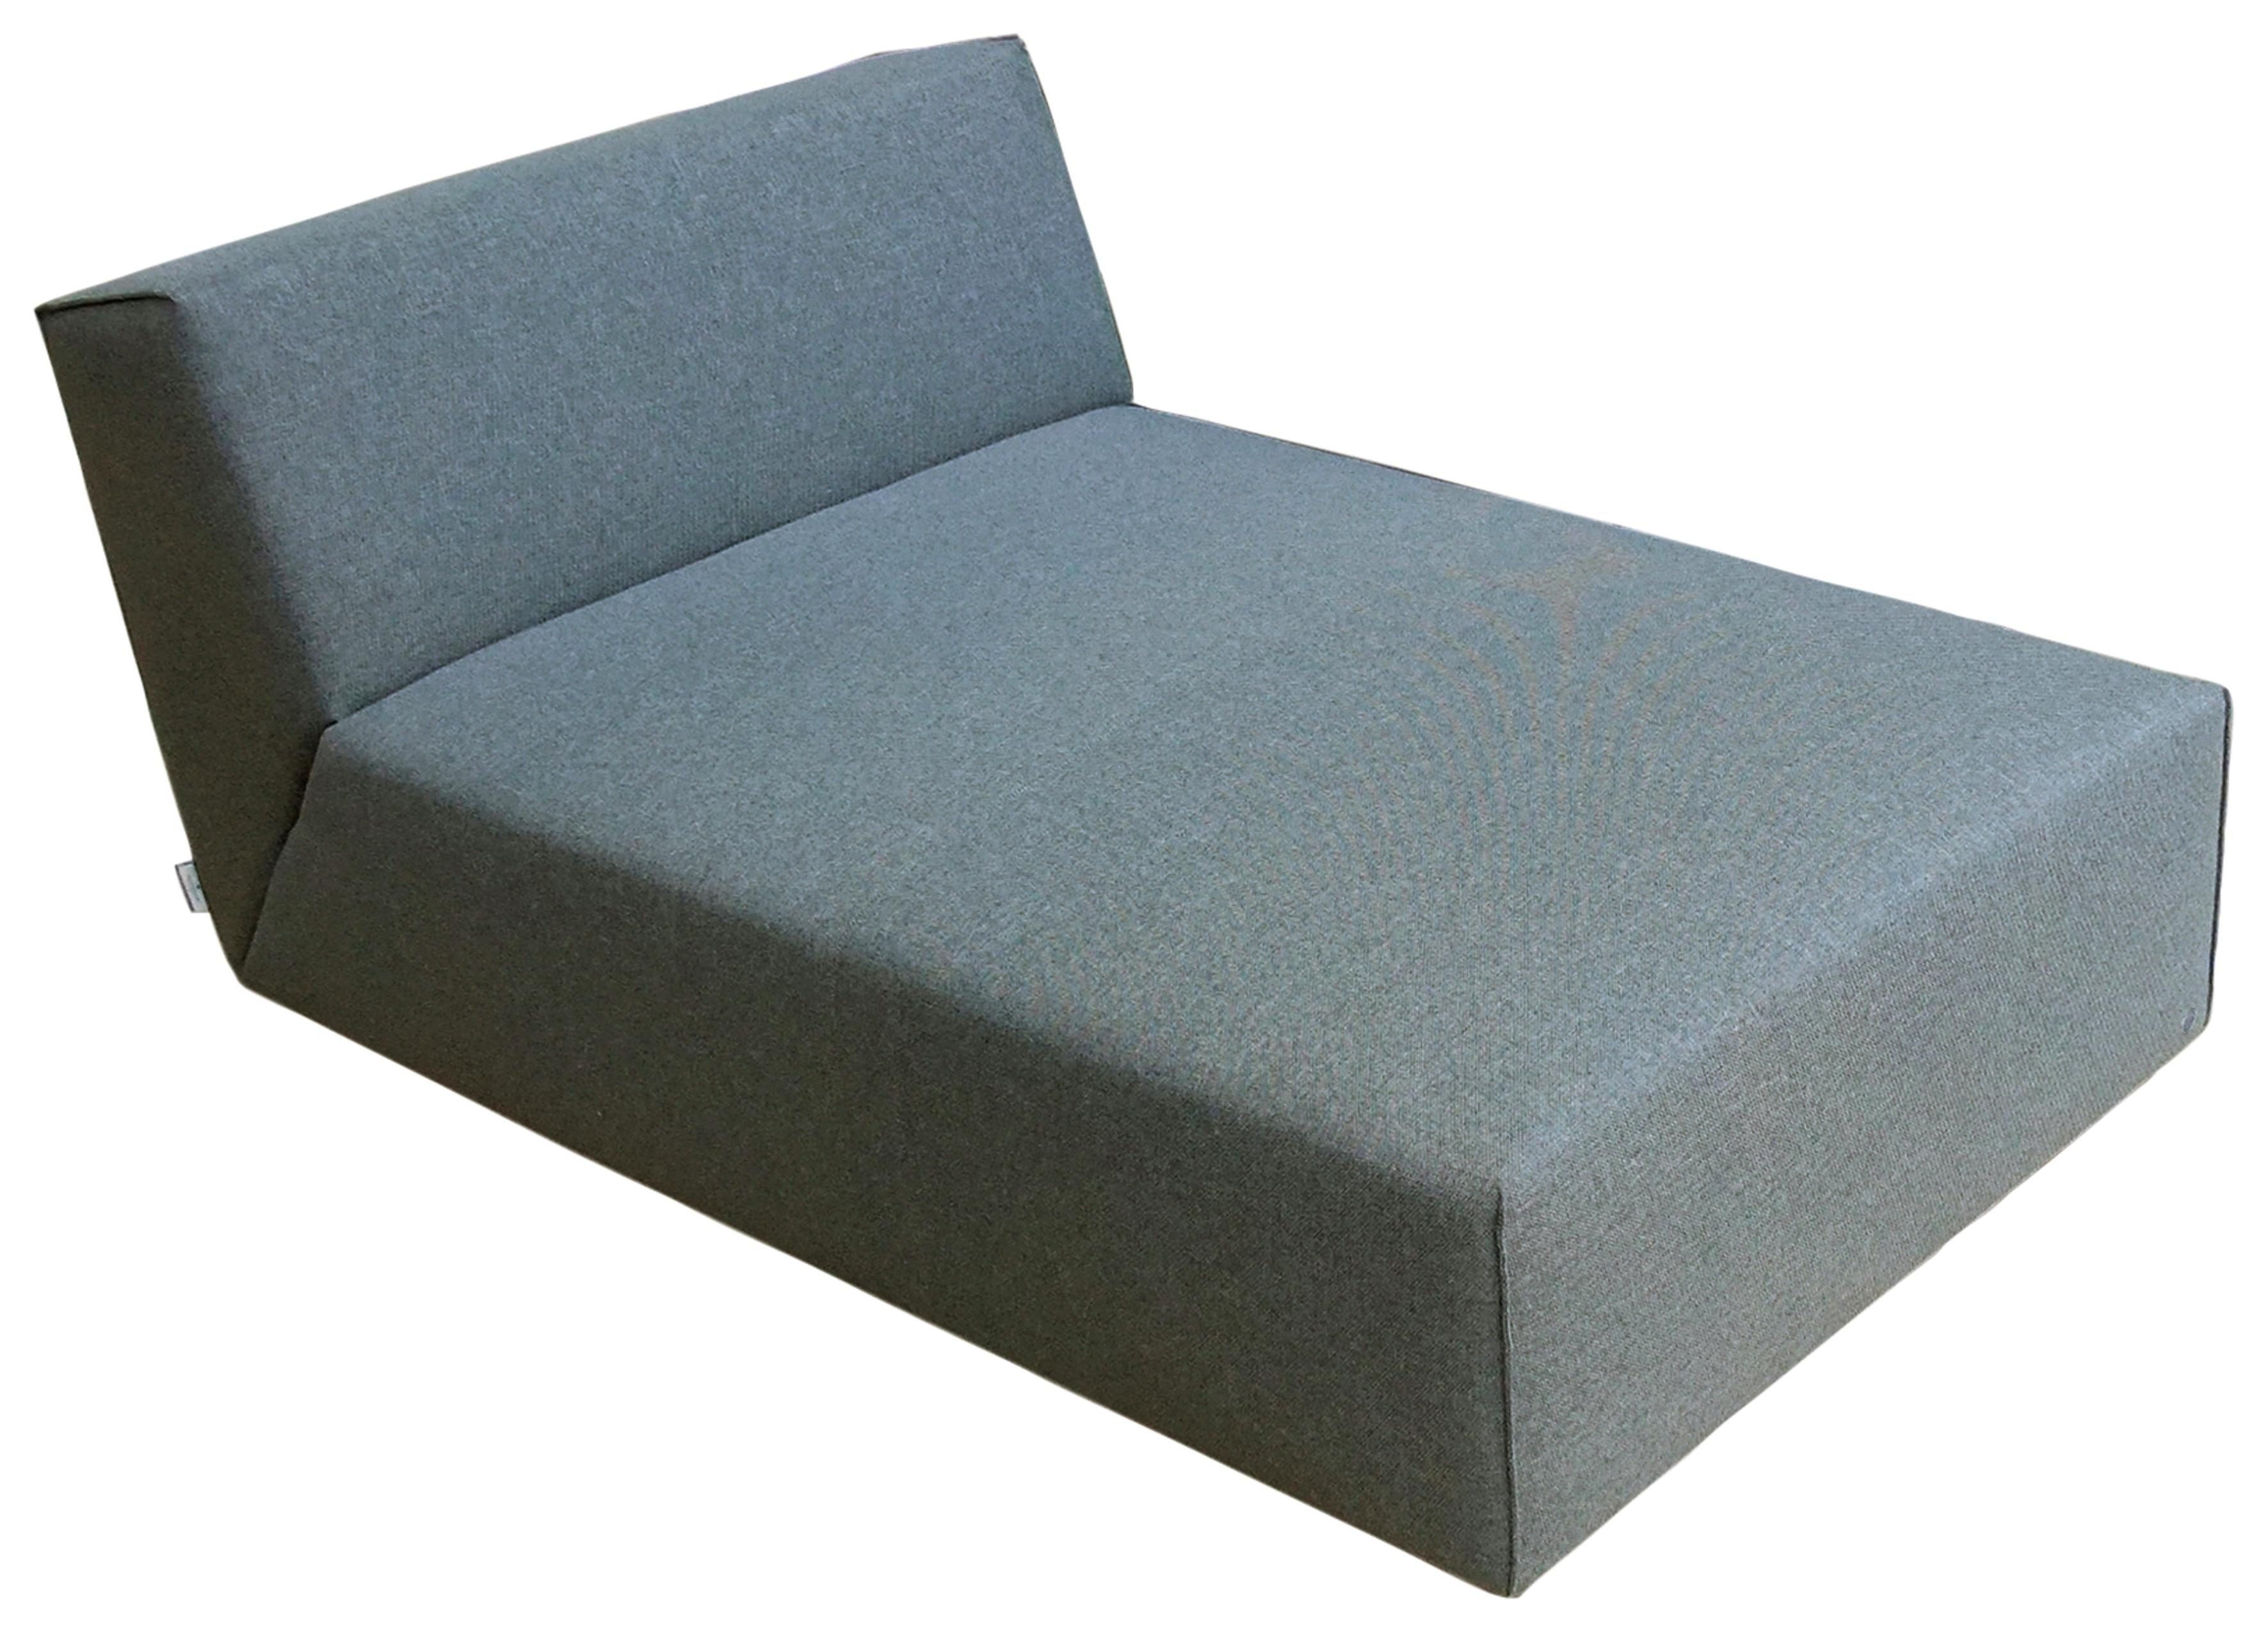 mit wahlweise ELEMENTS, Chaiselongue HOME TOM TAILOR Sofaelement Bettfunktion